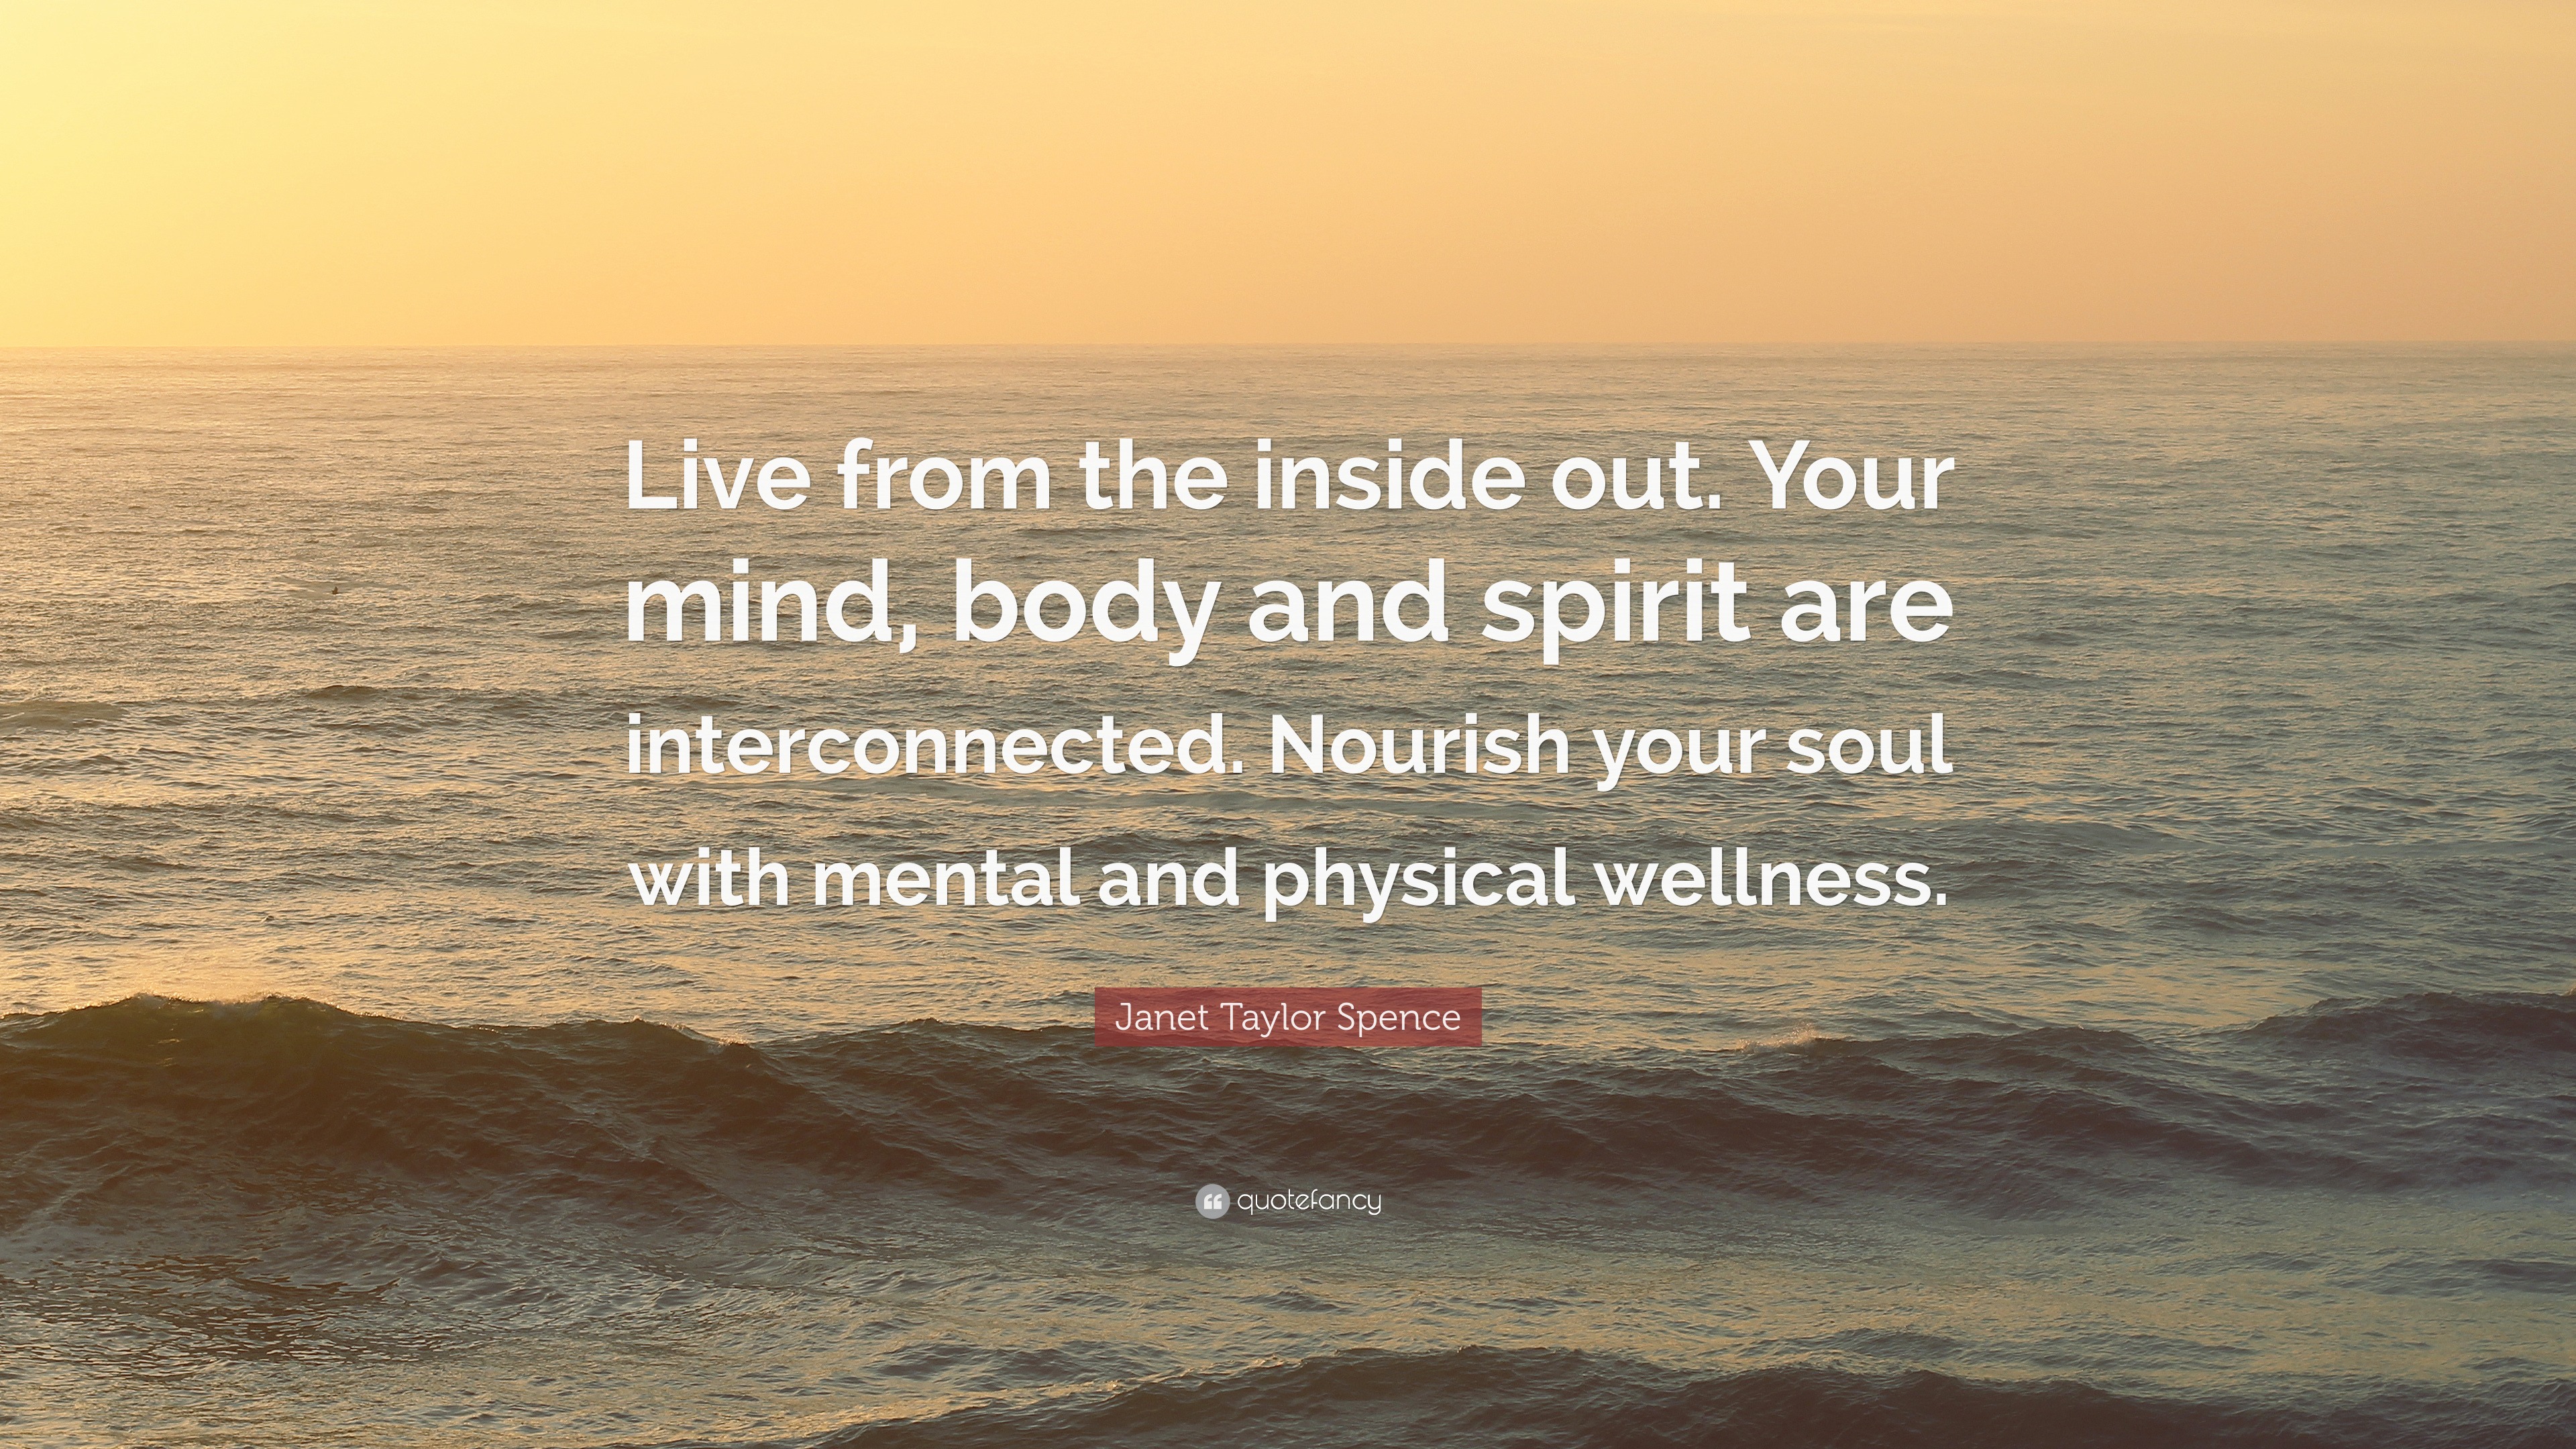 Janet Taylor Spence Quote Live From The Inside Out Your Mind Body And Spirit Are Interconnected Nourish Your Soul With Mental And Physical Well